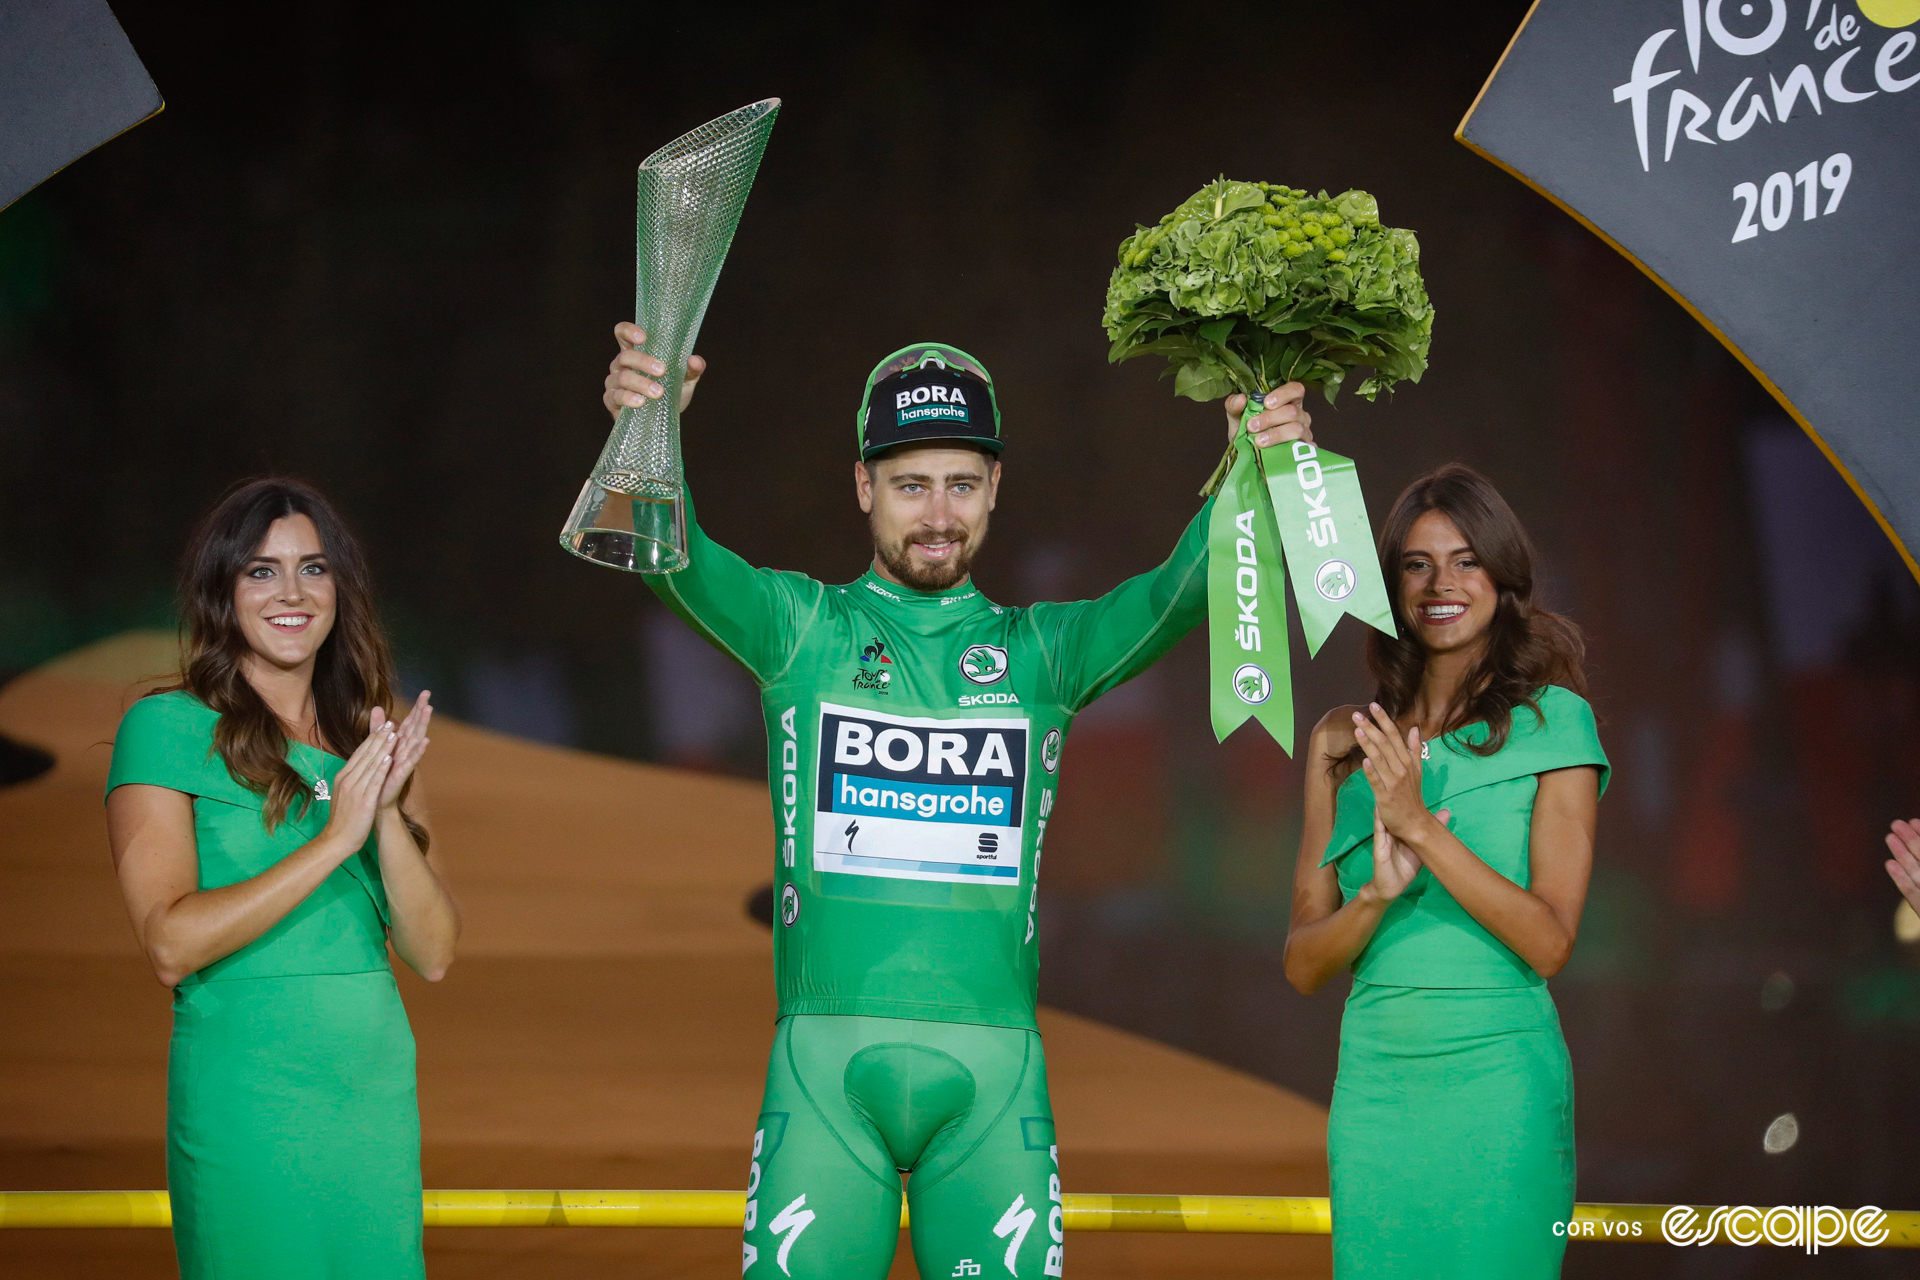 Peter Sagan on the final podium at the 2019 Tour de France wearing green, holding a bouquet of flowers and trophy, with a podium hostess on either side of him.